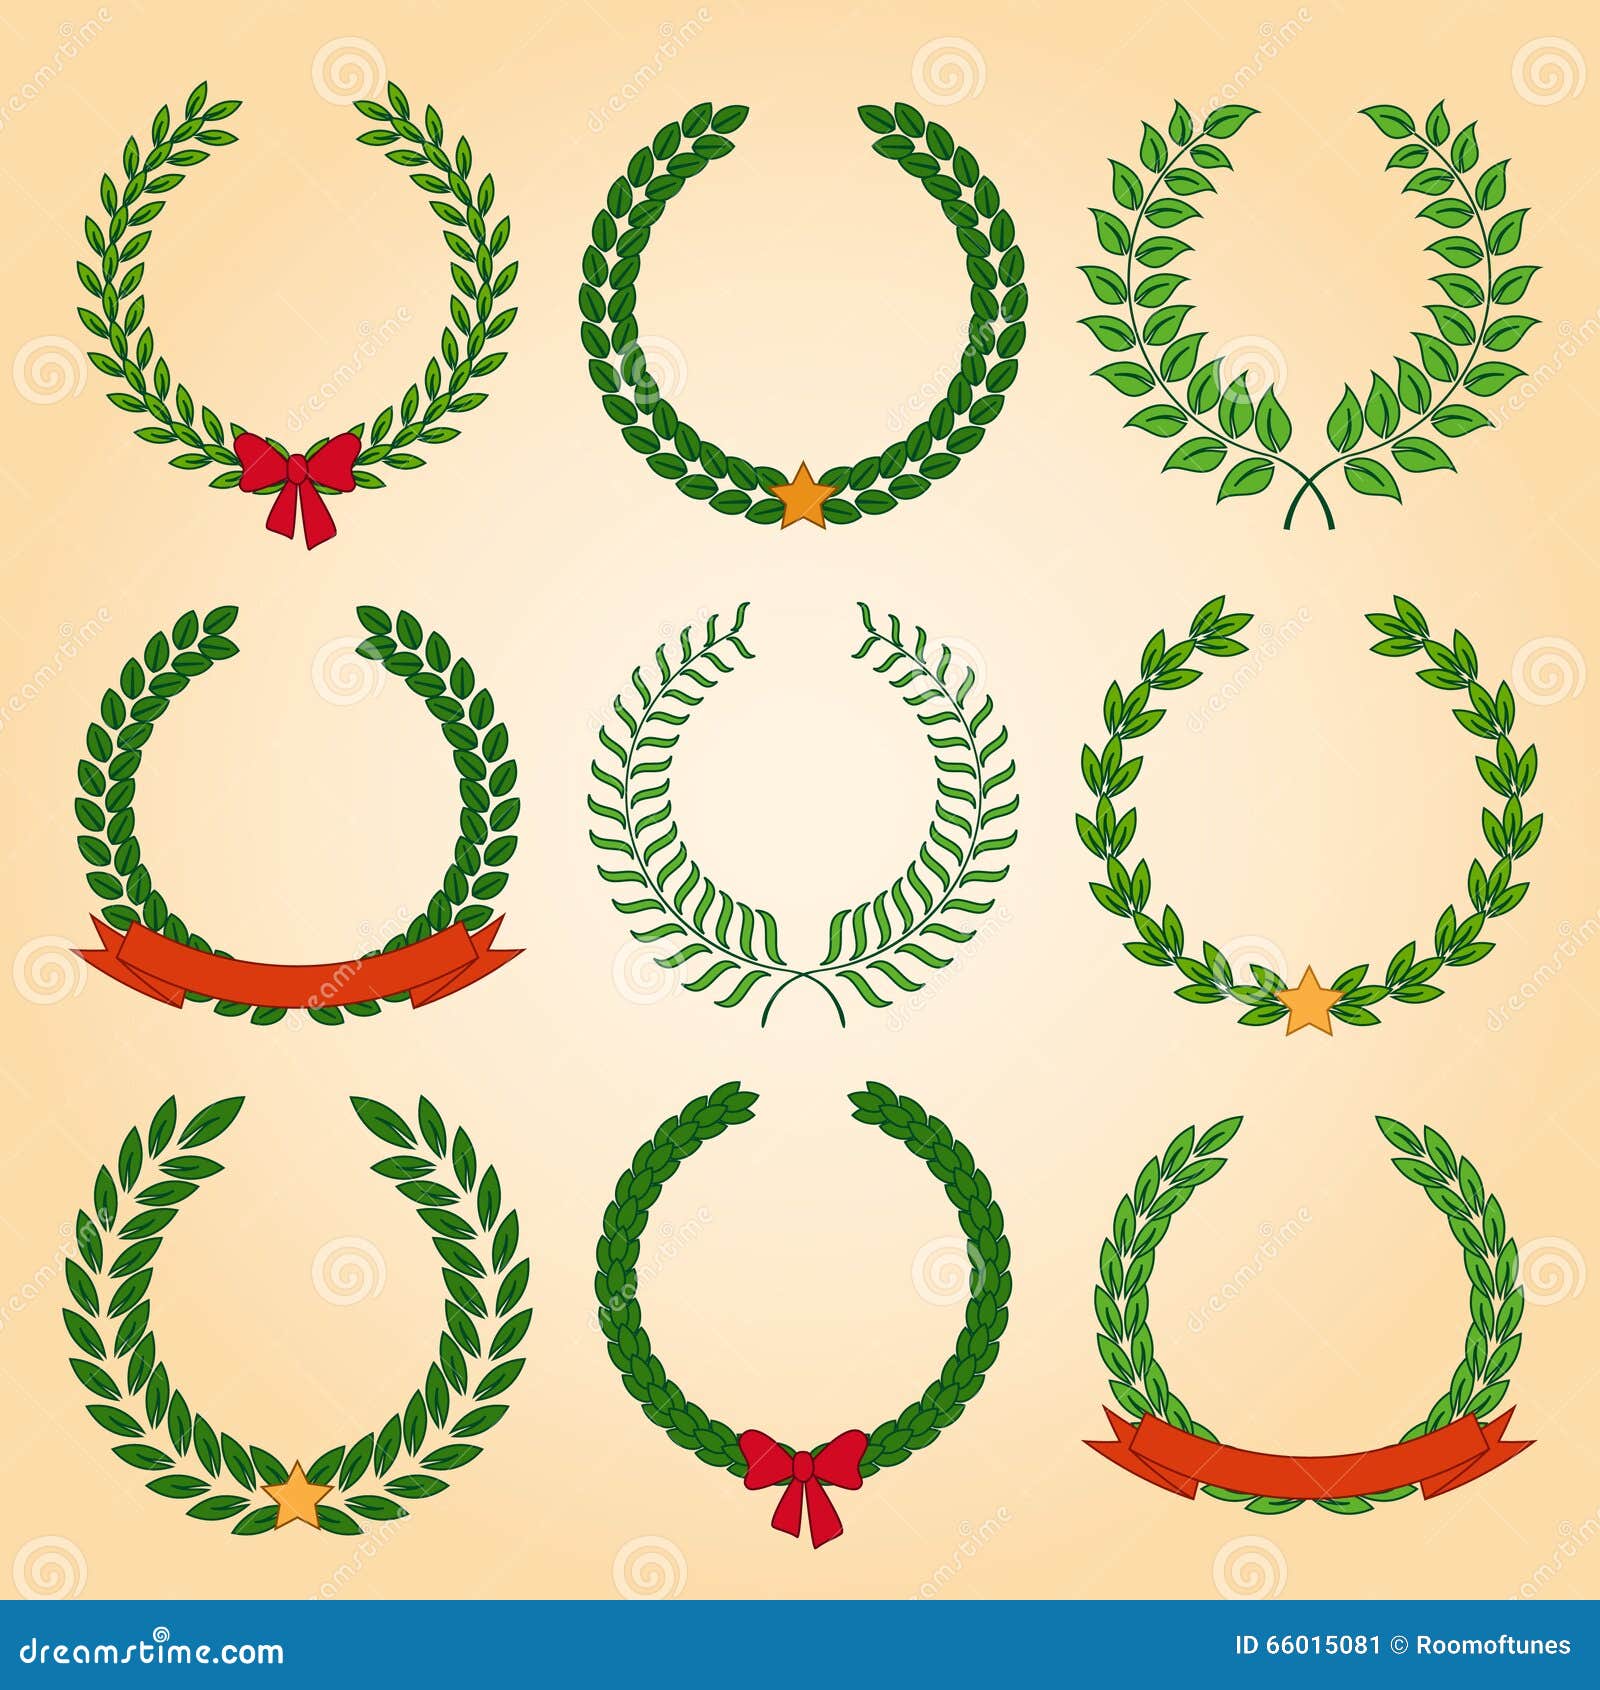 Collection Of Laurel Wreaths Vector Silhouettes